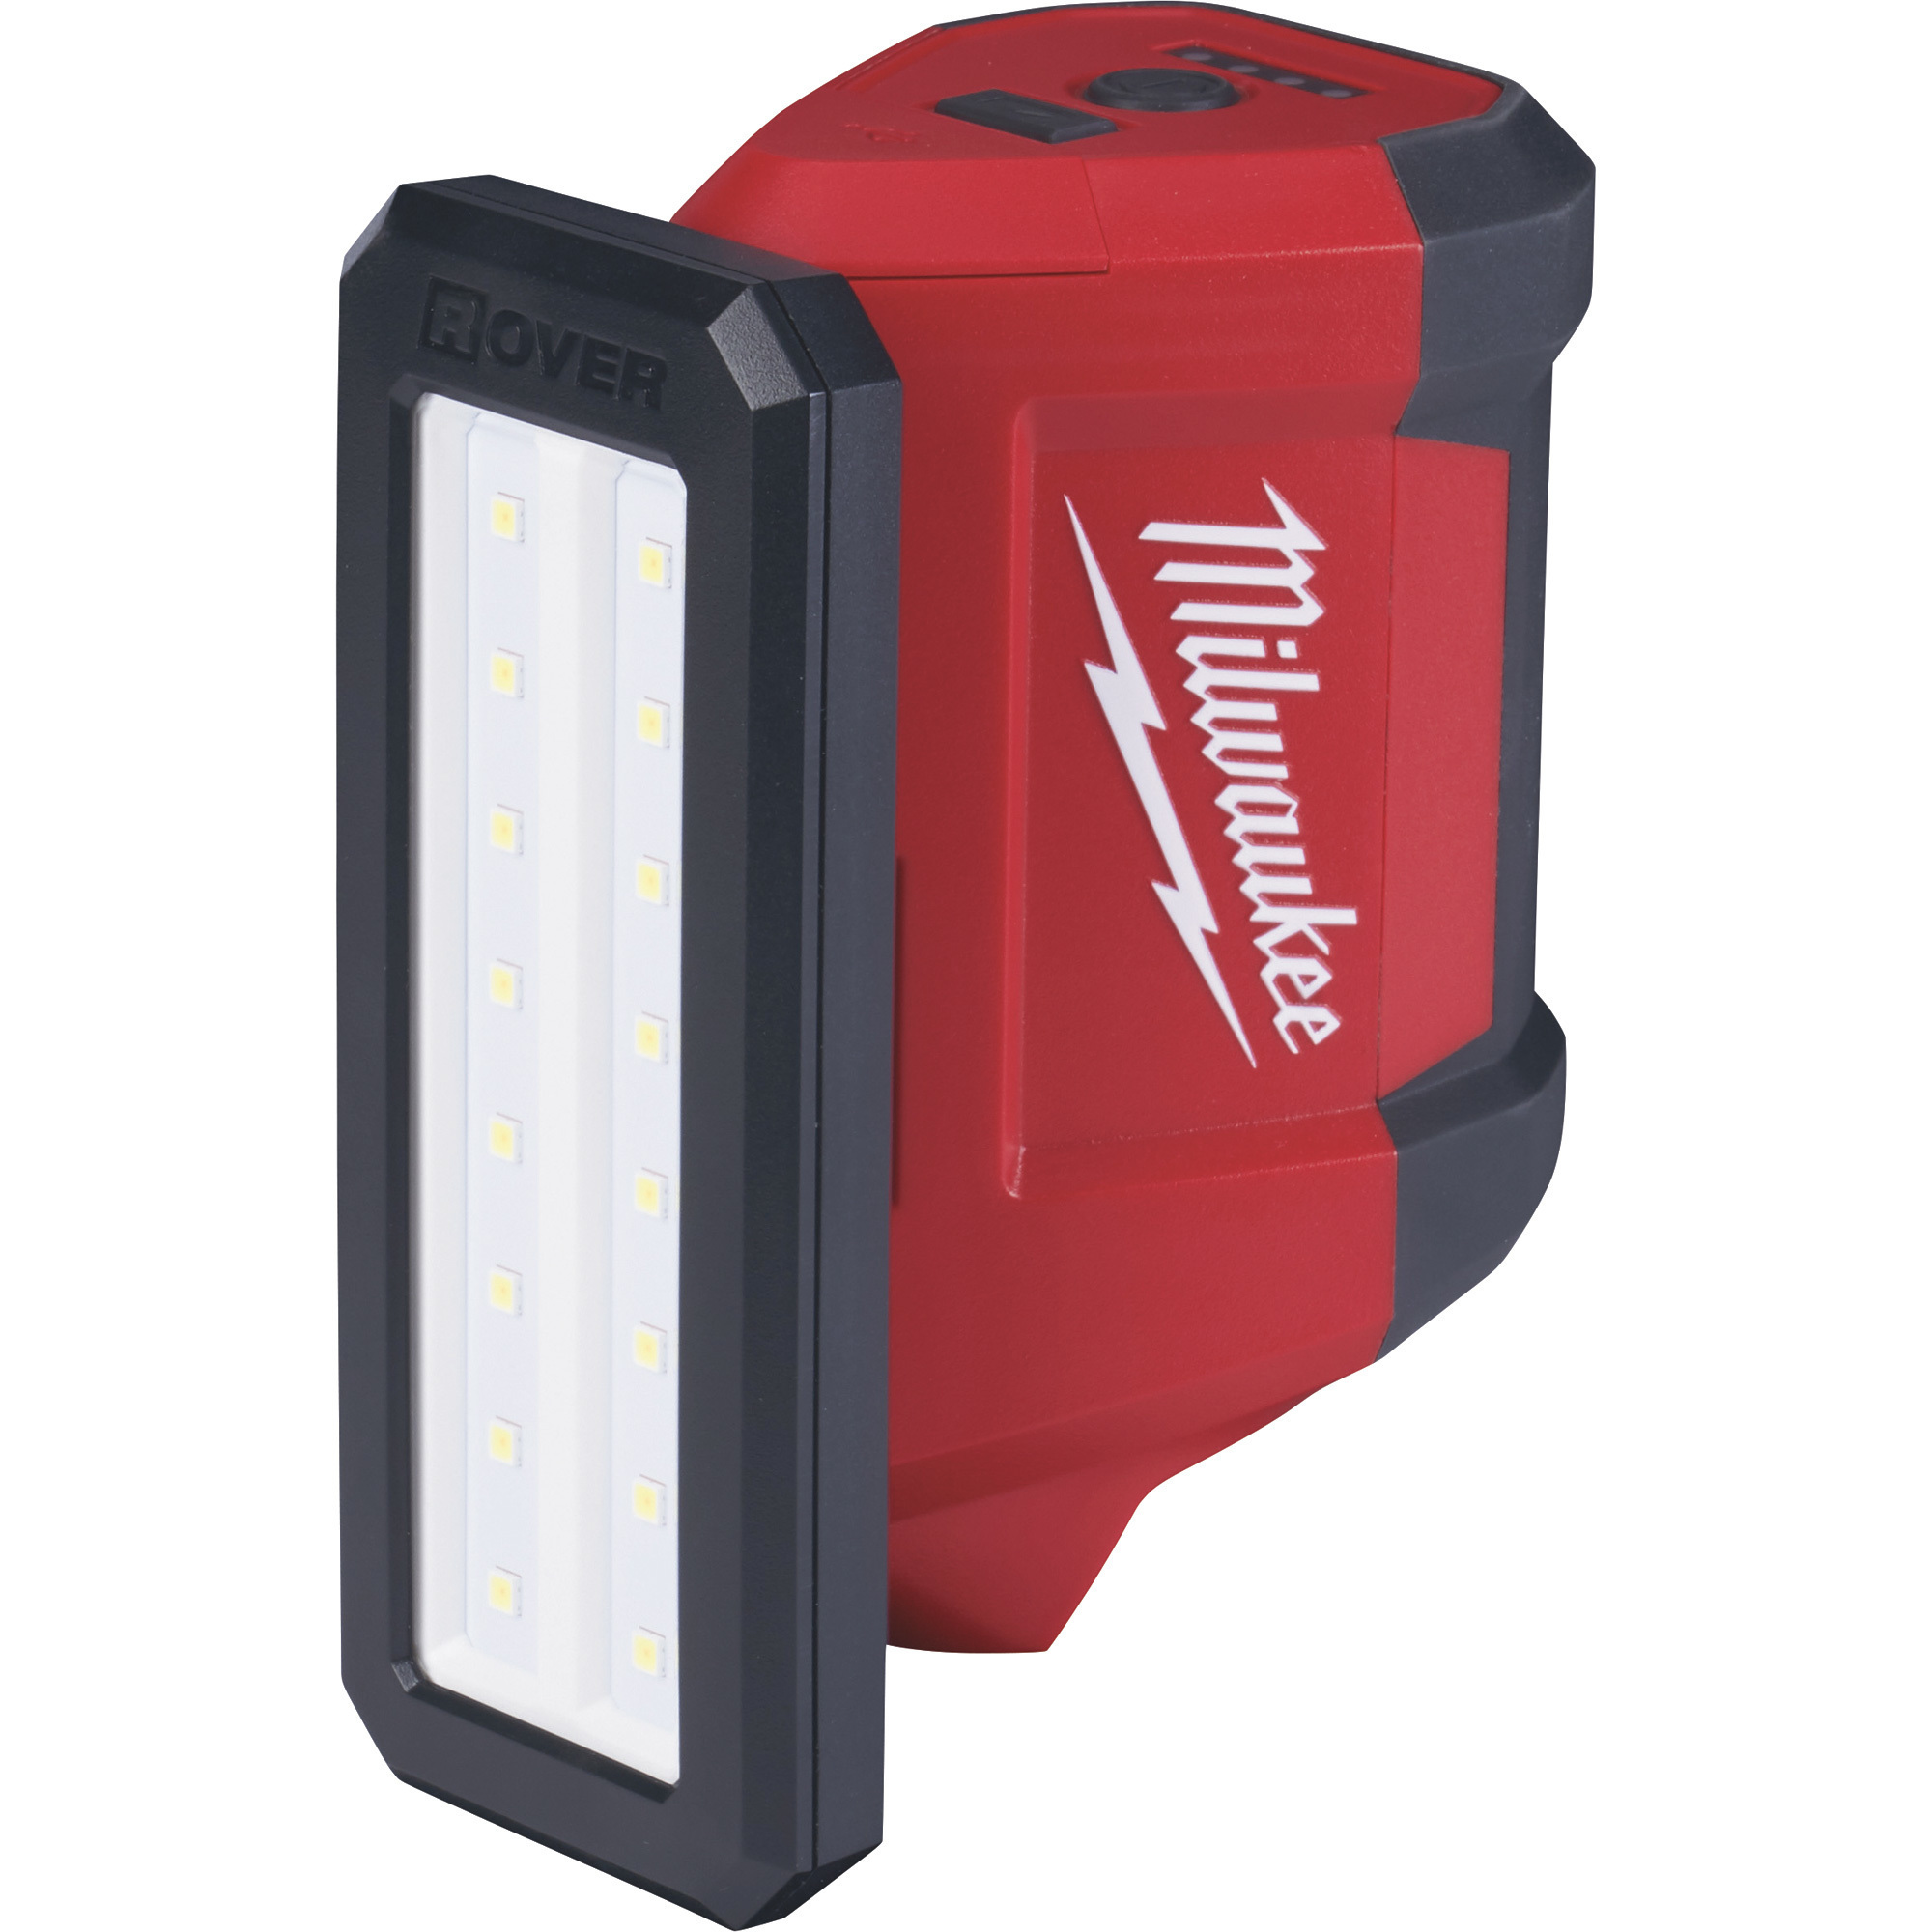 Milwaukee M12 Rover Compact Pivoting Flood Light with USB Charging, 700 Lumens, Model 2367-20